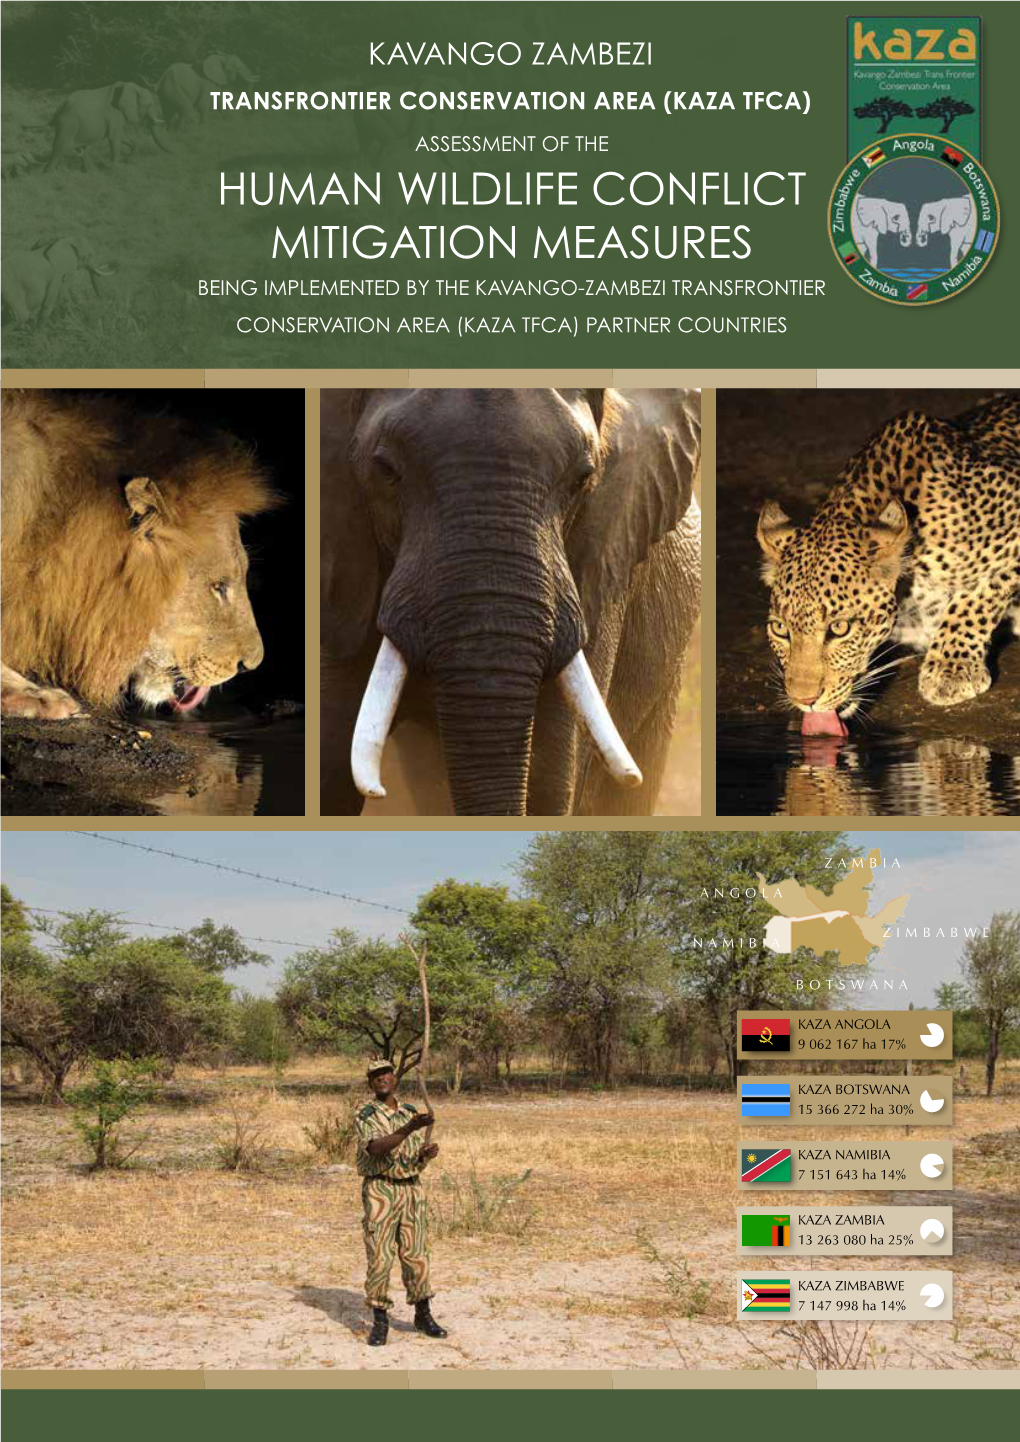 Human Wildlife Conflict Mitigation Measures Being Implemented by the Kavango-Zambezi Transfrontier Conservation Area (KAZA TFCA) Partner Countries